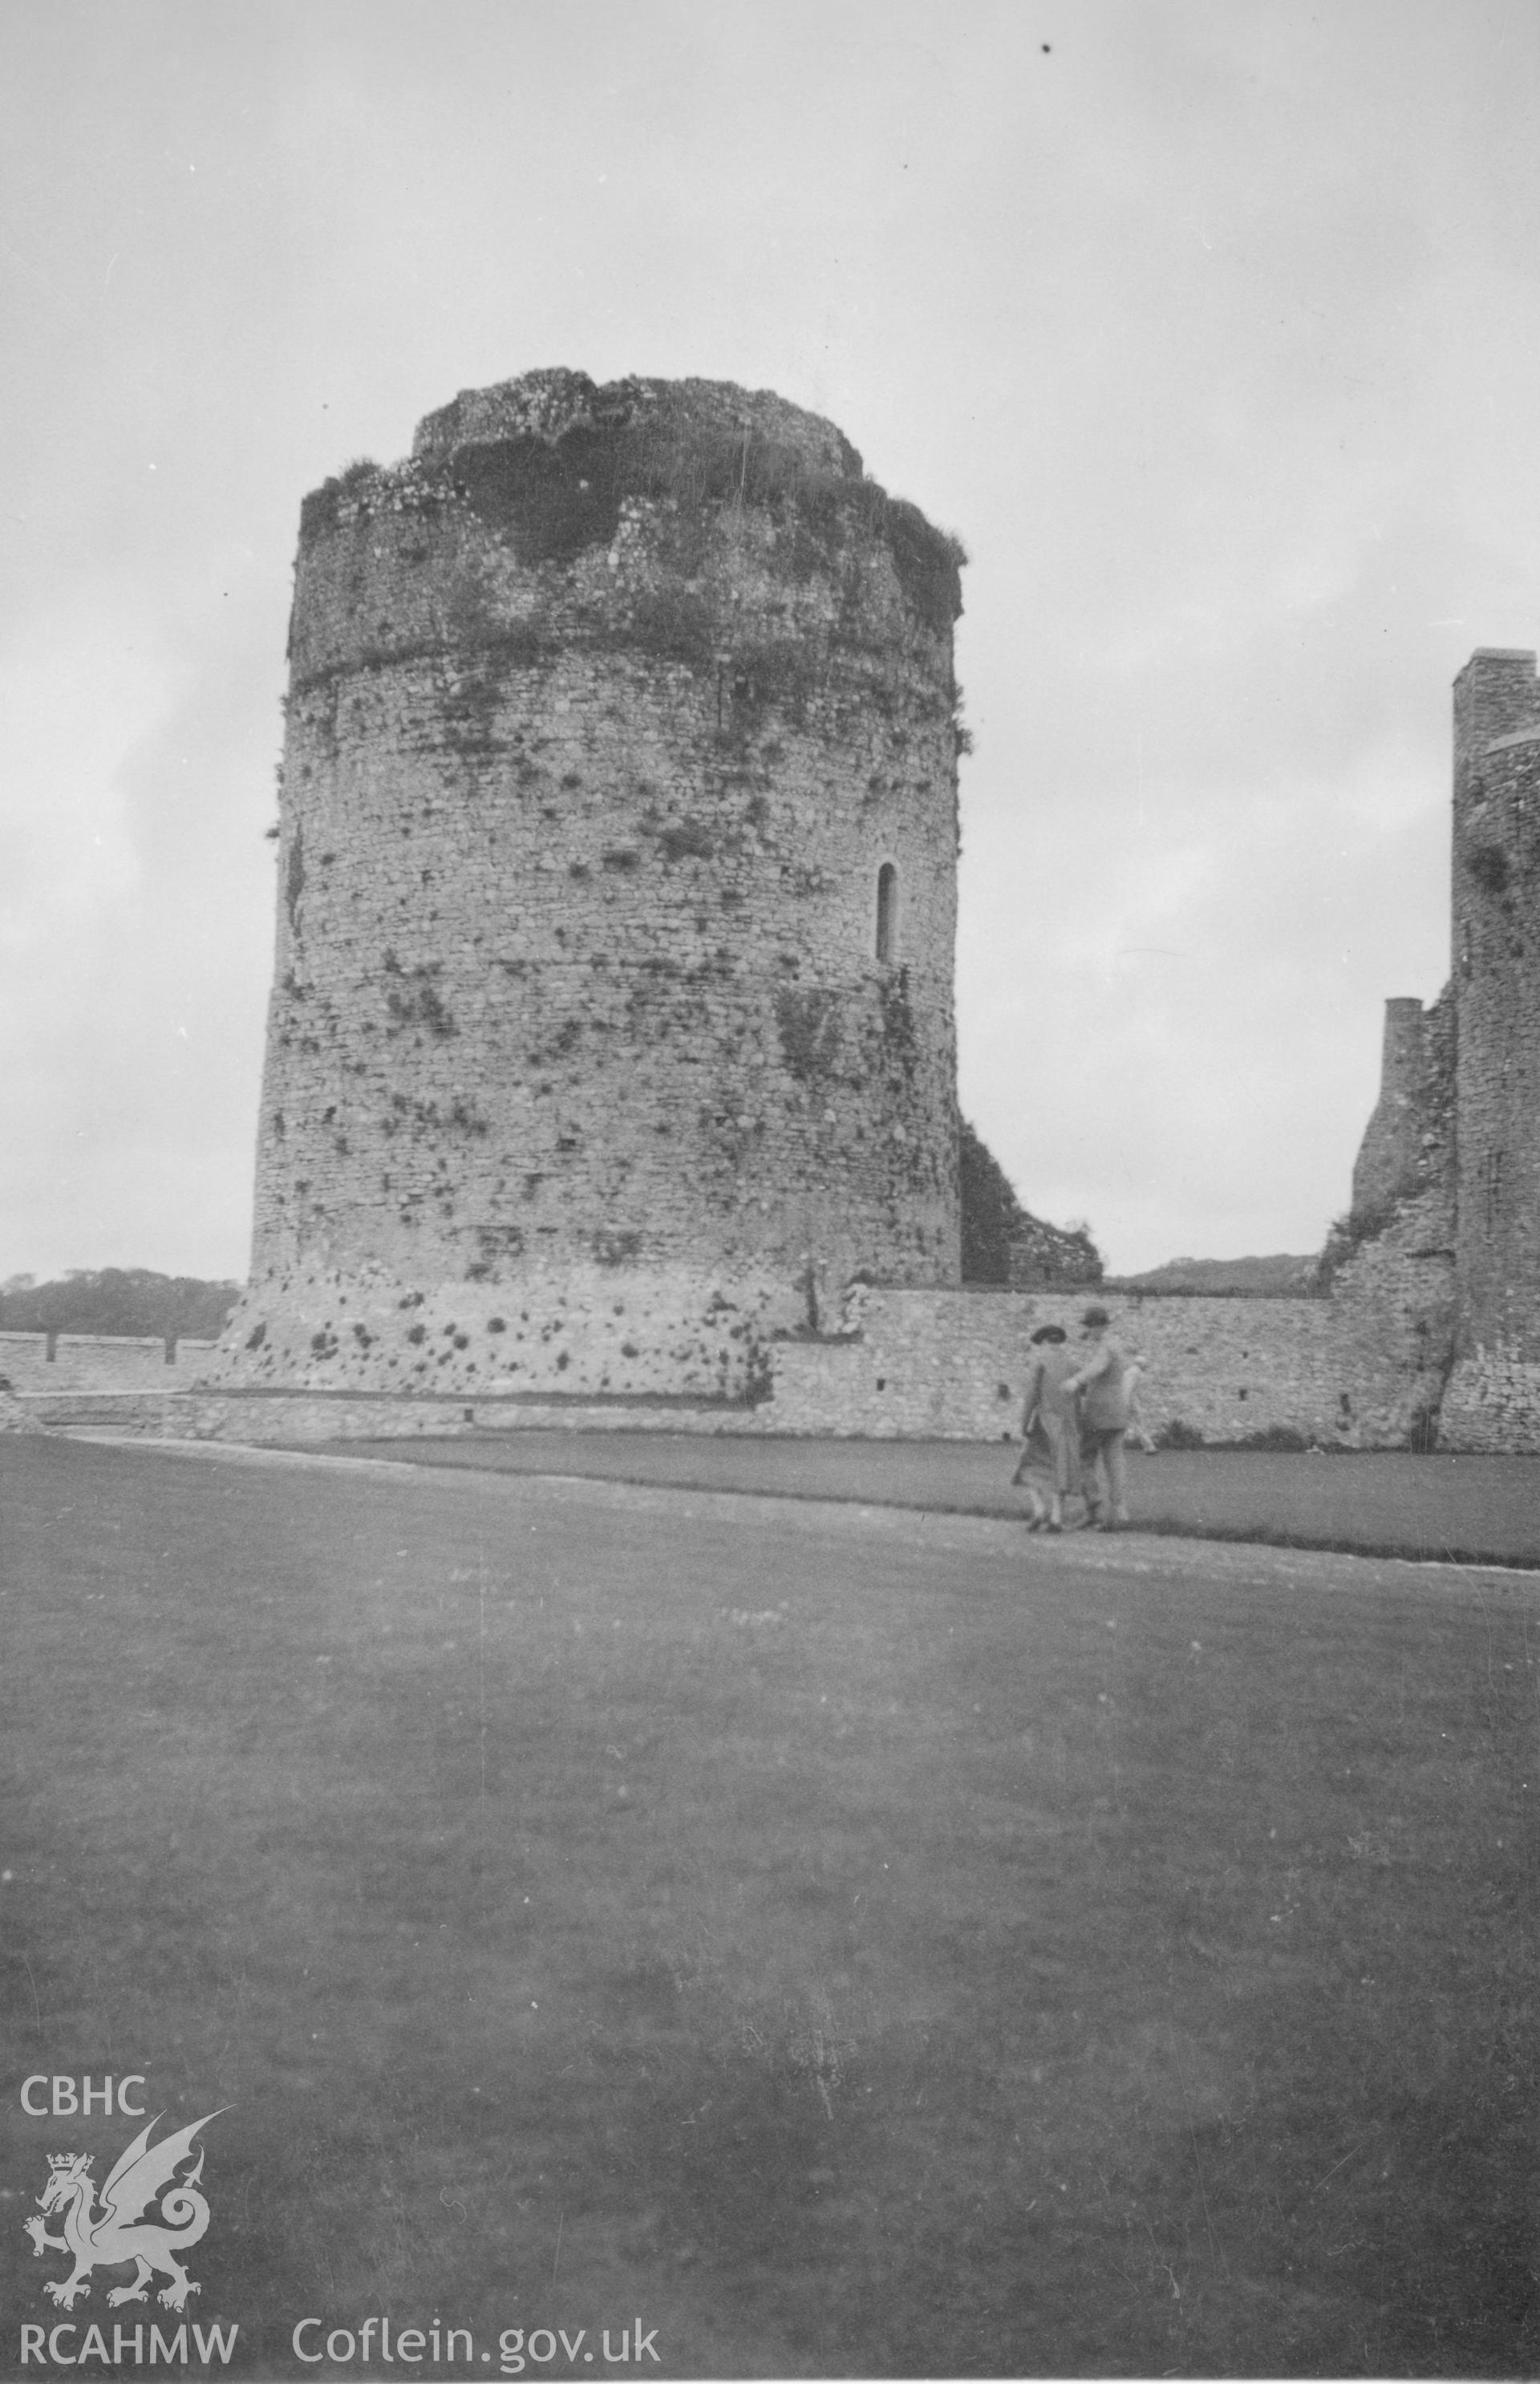 View of tower at Pembroke Castle with two figures in foreground.  Dated 1937.